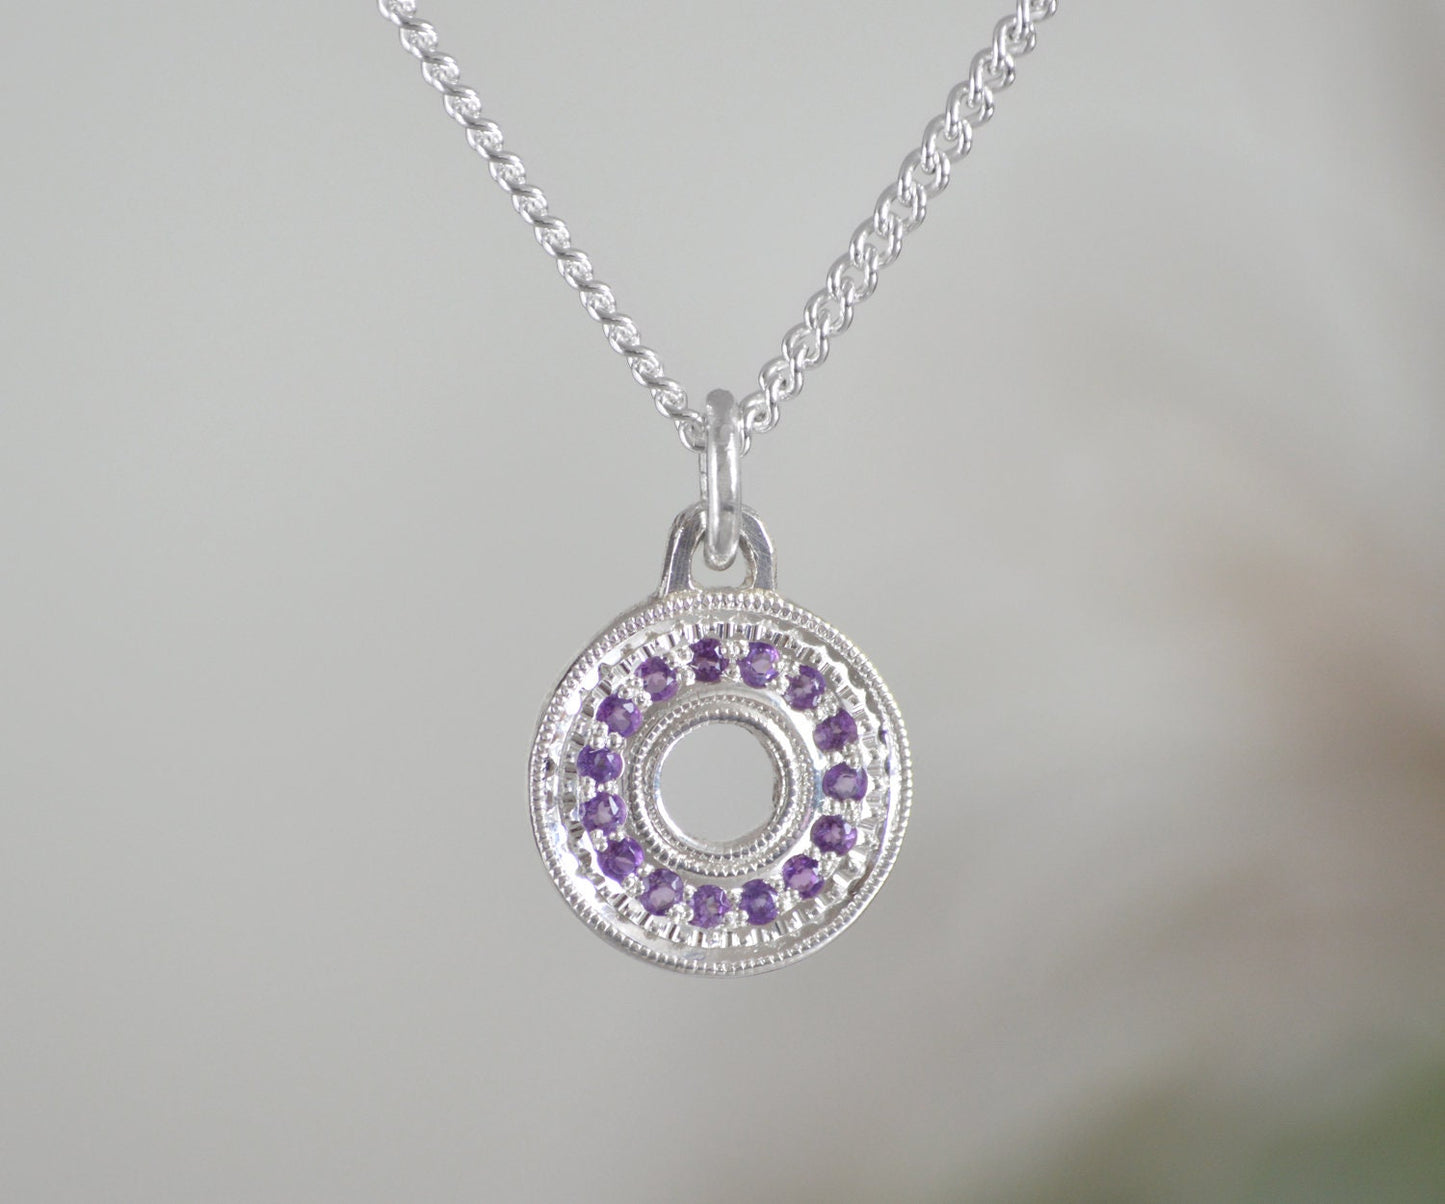 Amethyst Necklace in Sterling Silver, Pave Amethyst Necklace, February Birthstone Necklace